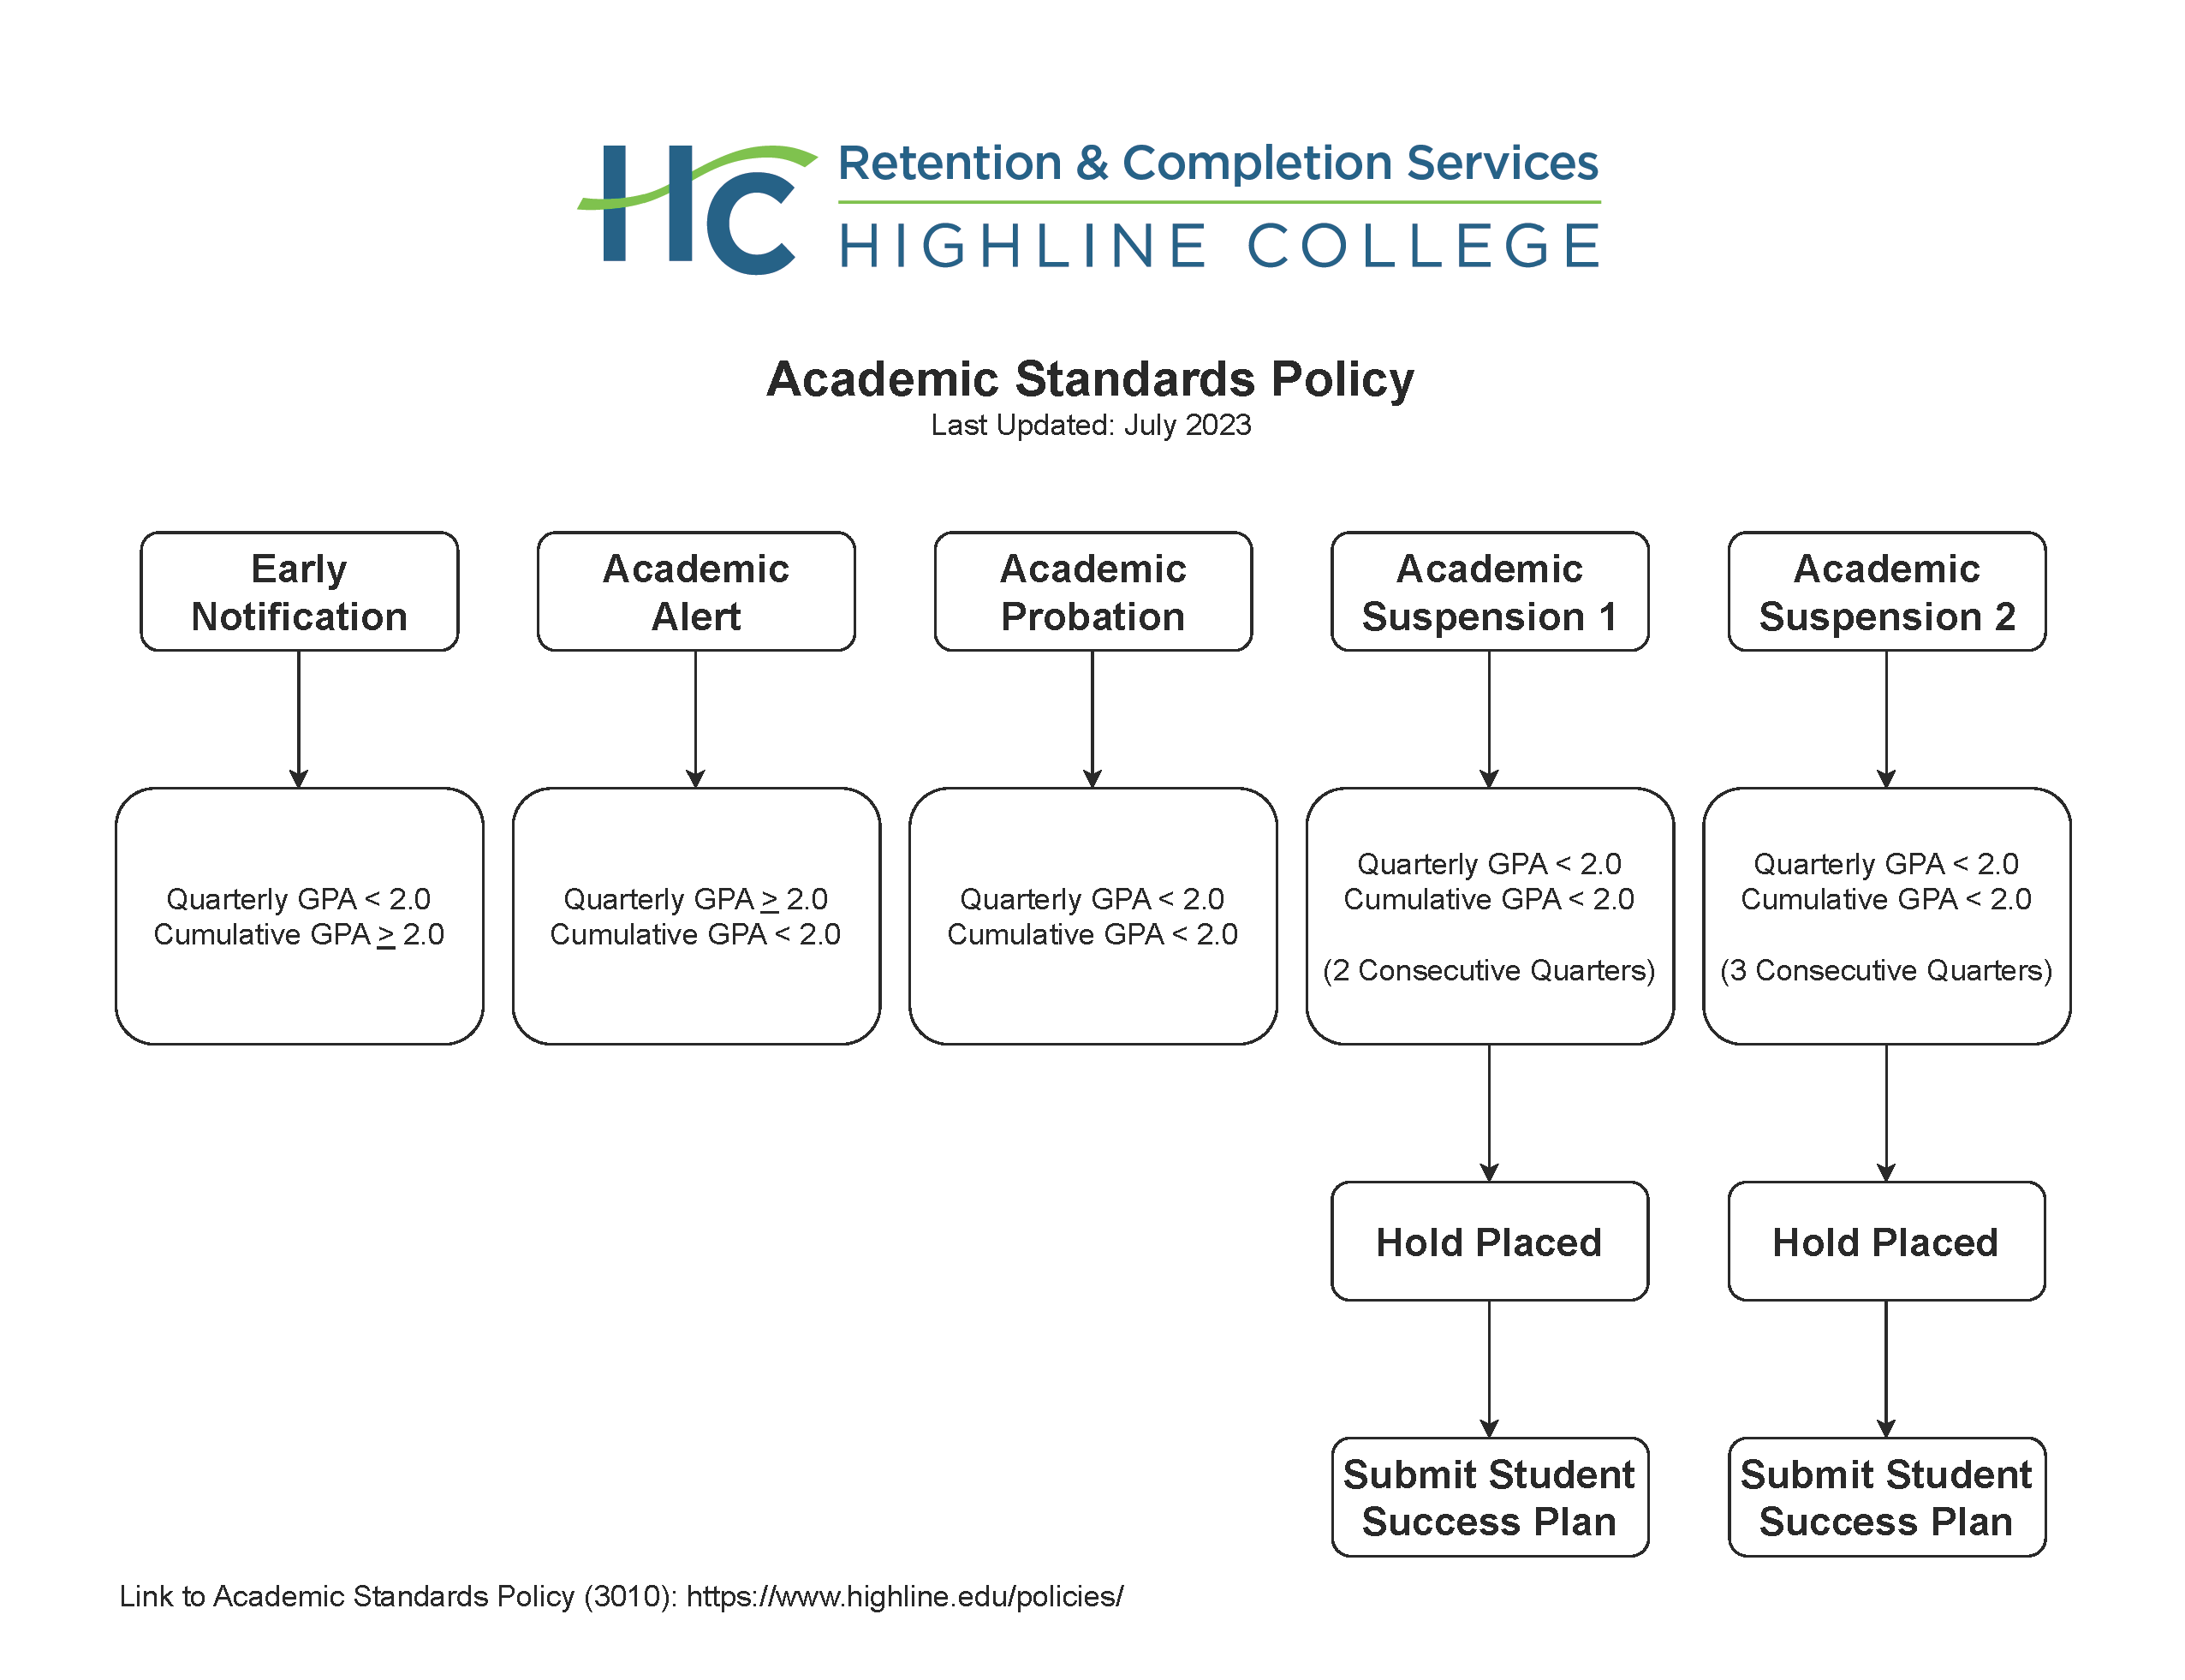 Academics Standards Policy diagram. See information above for details.